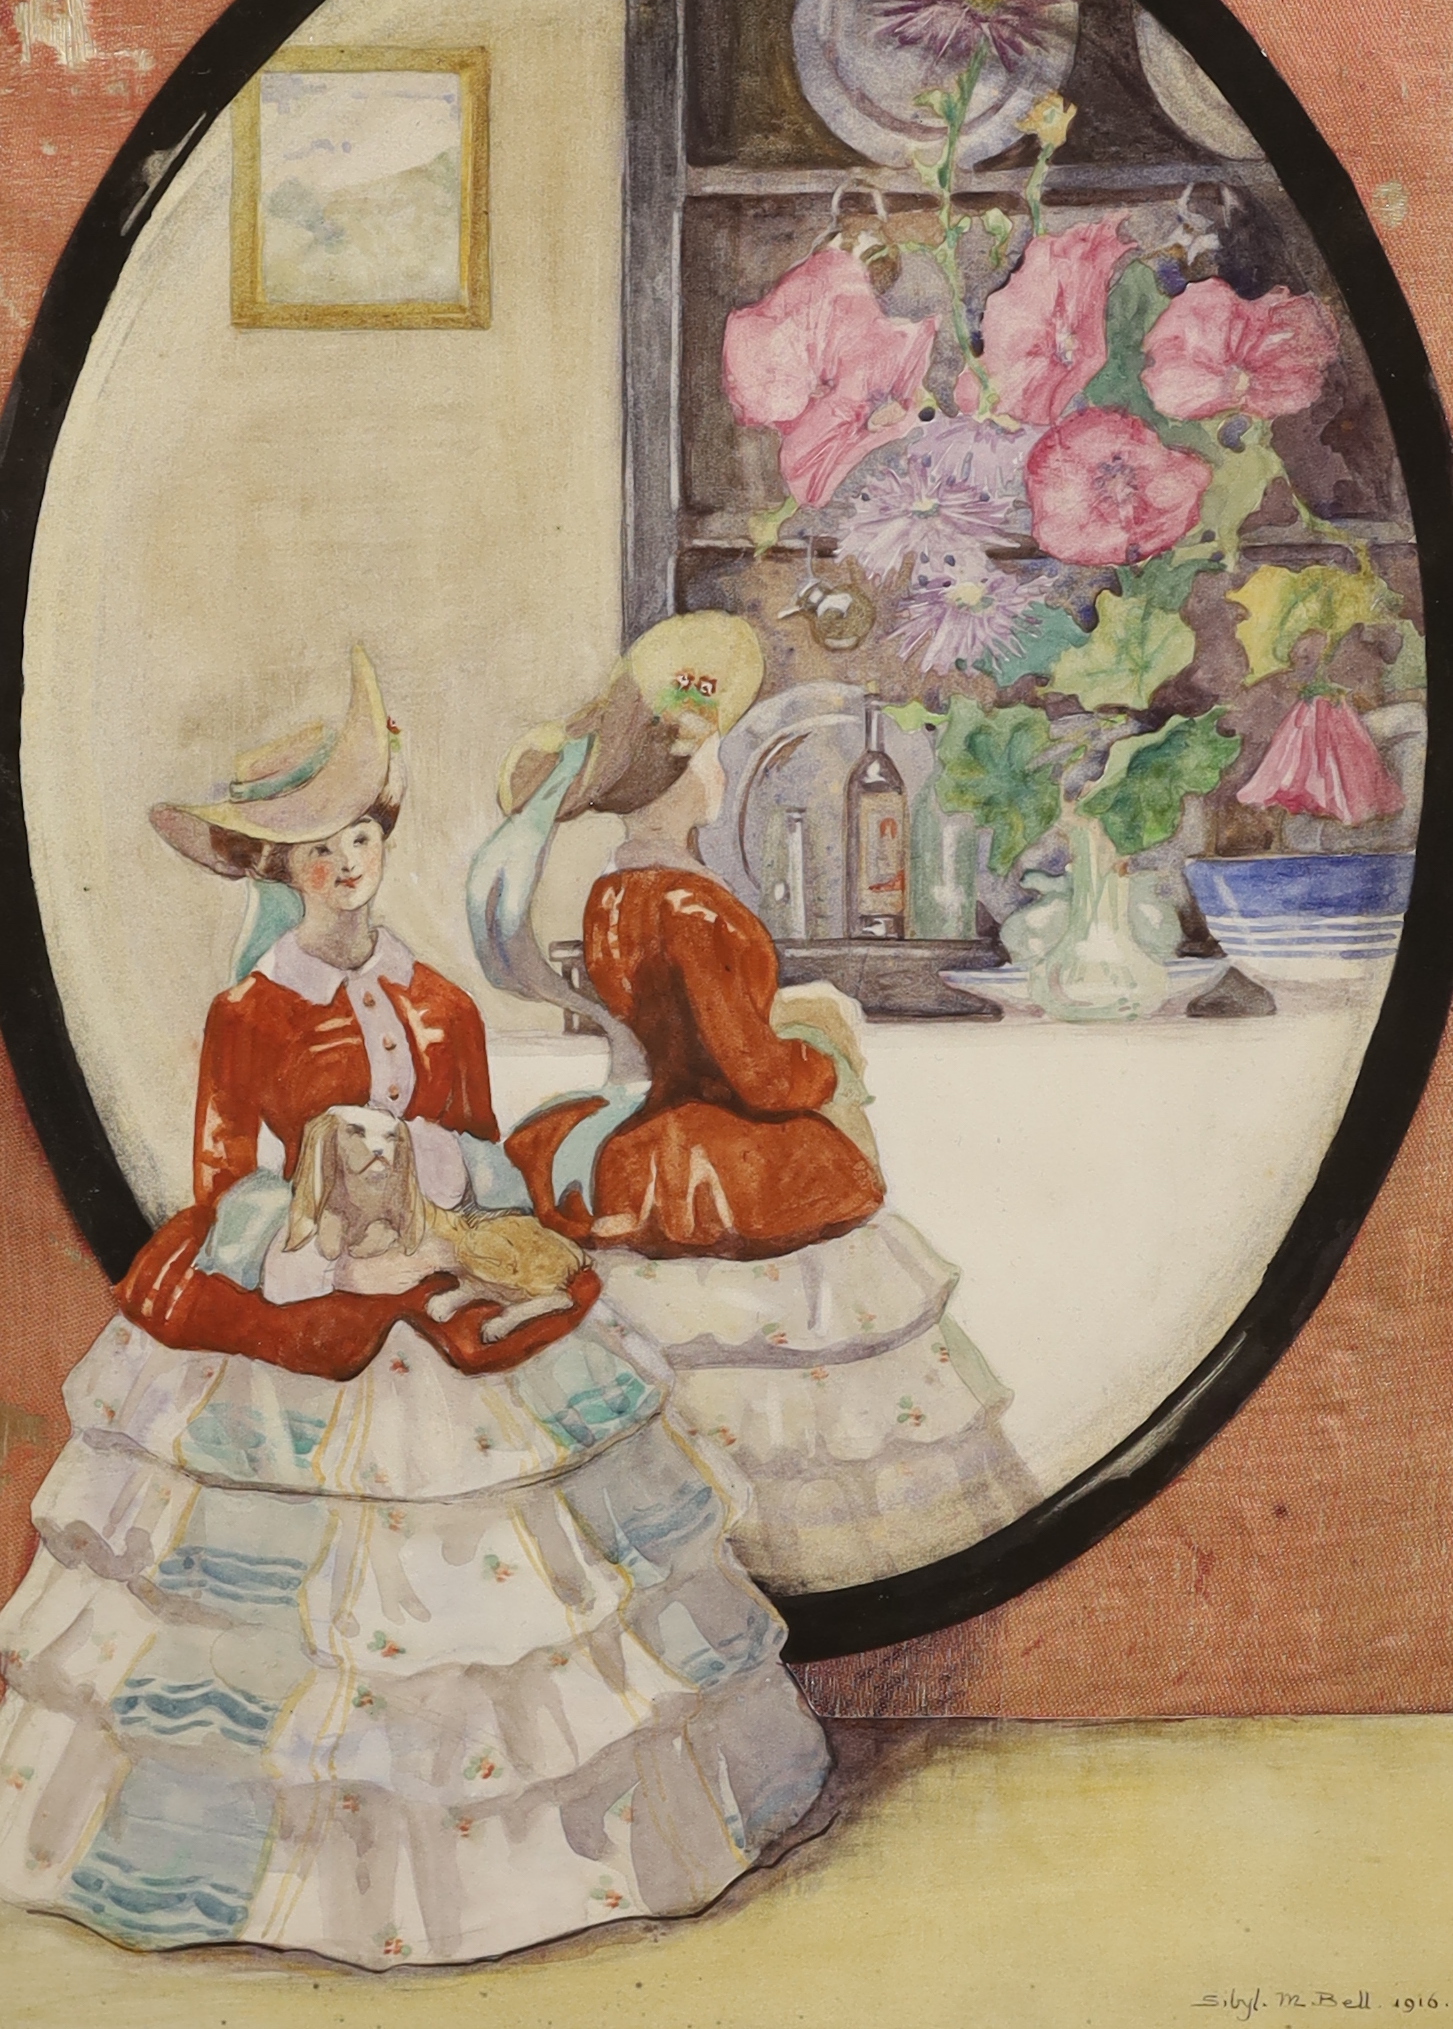 Sibyl M. Bell (19th / 20th. C) watercolour and collage, Crinoline lady before flowers, signed and dated 1916, inscribed verso ‘Exhibited Society of Women Artists’, 36 x 25cm